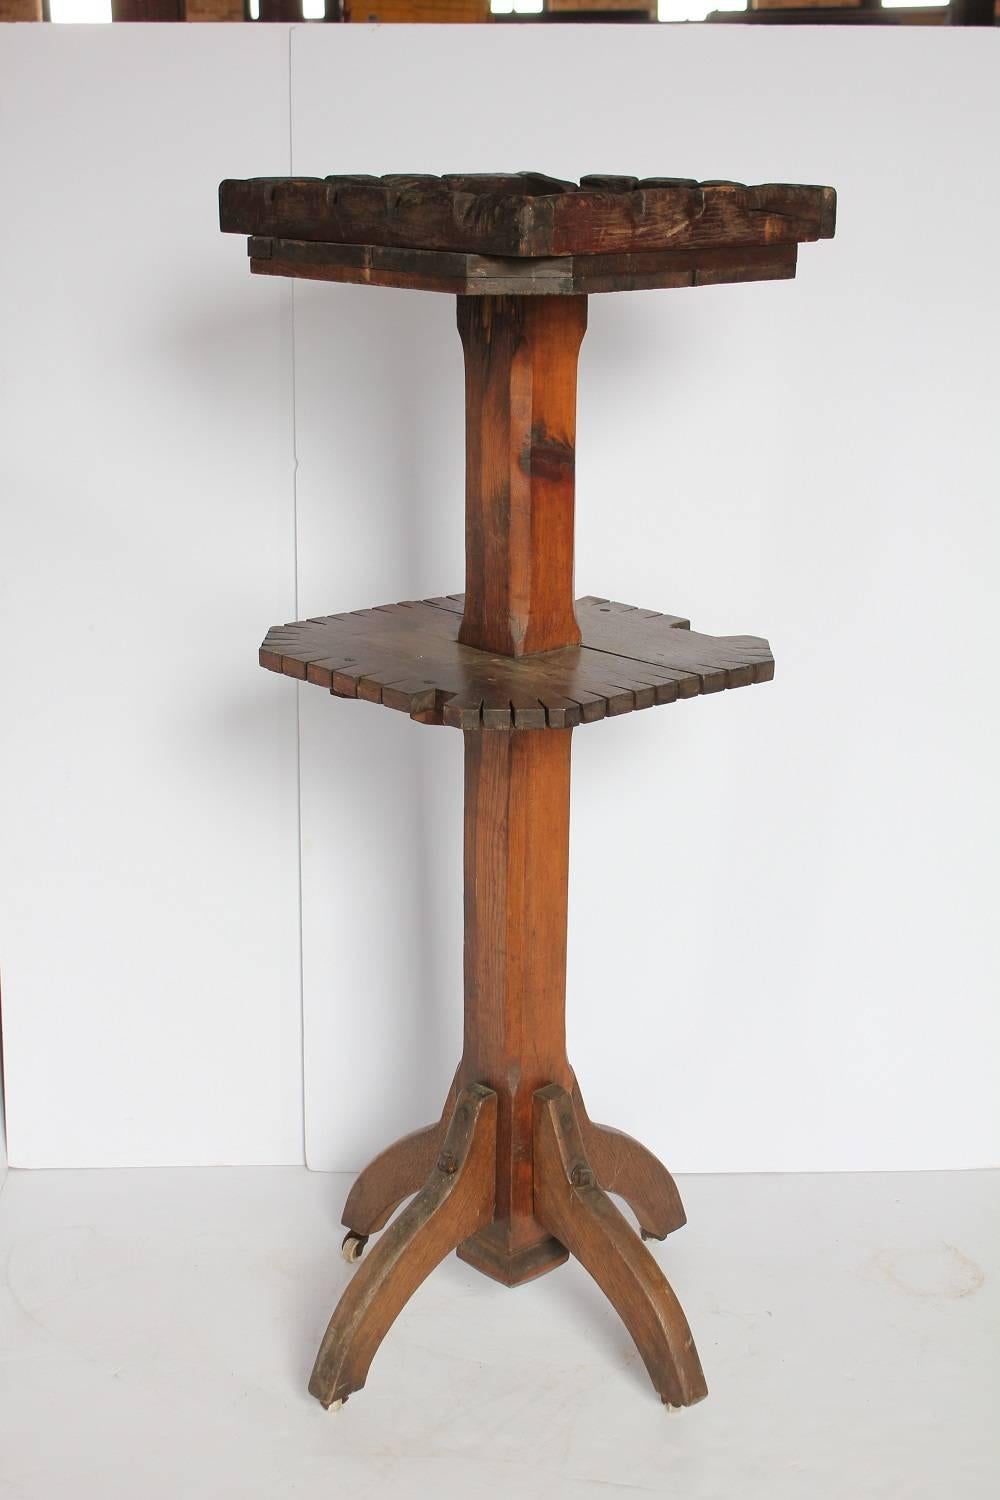 Antique dry goods store display wood stand on wheels.